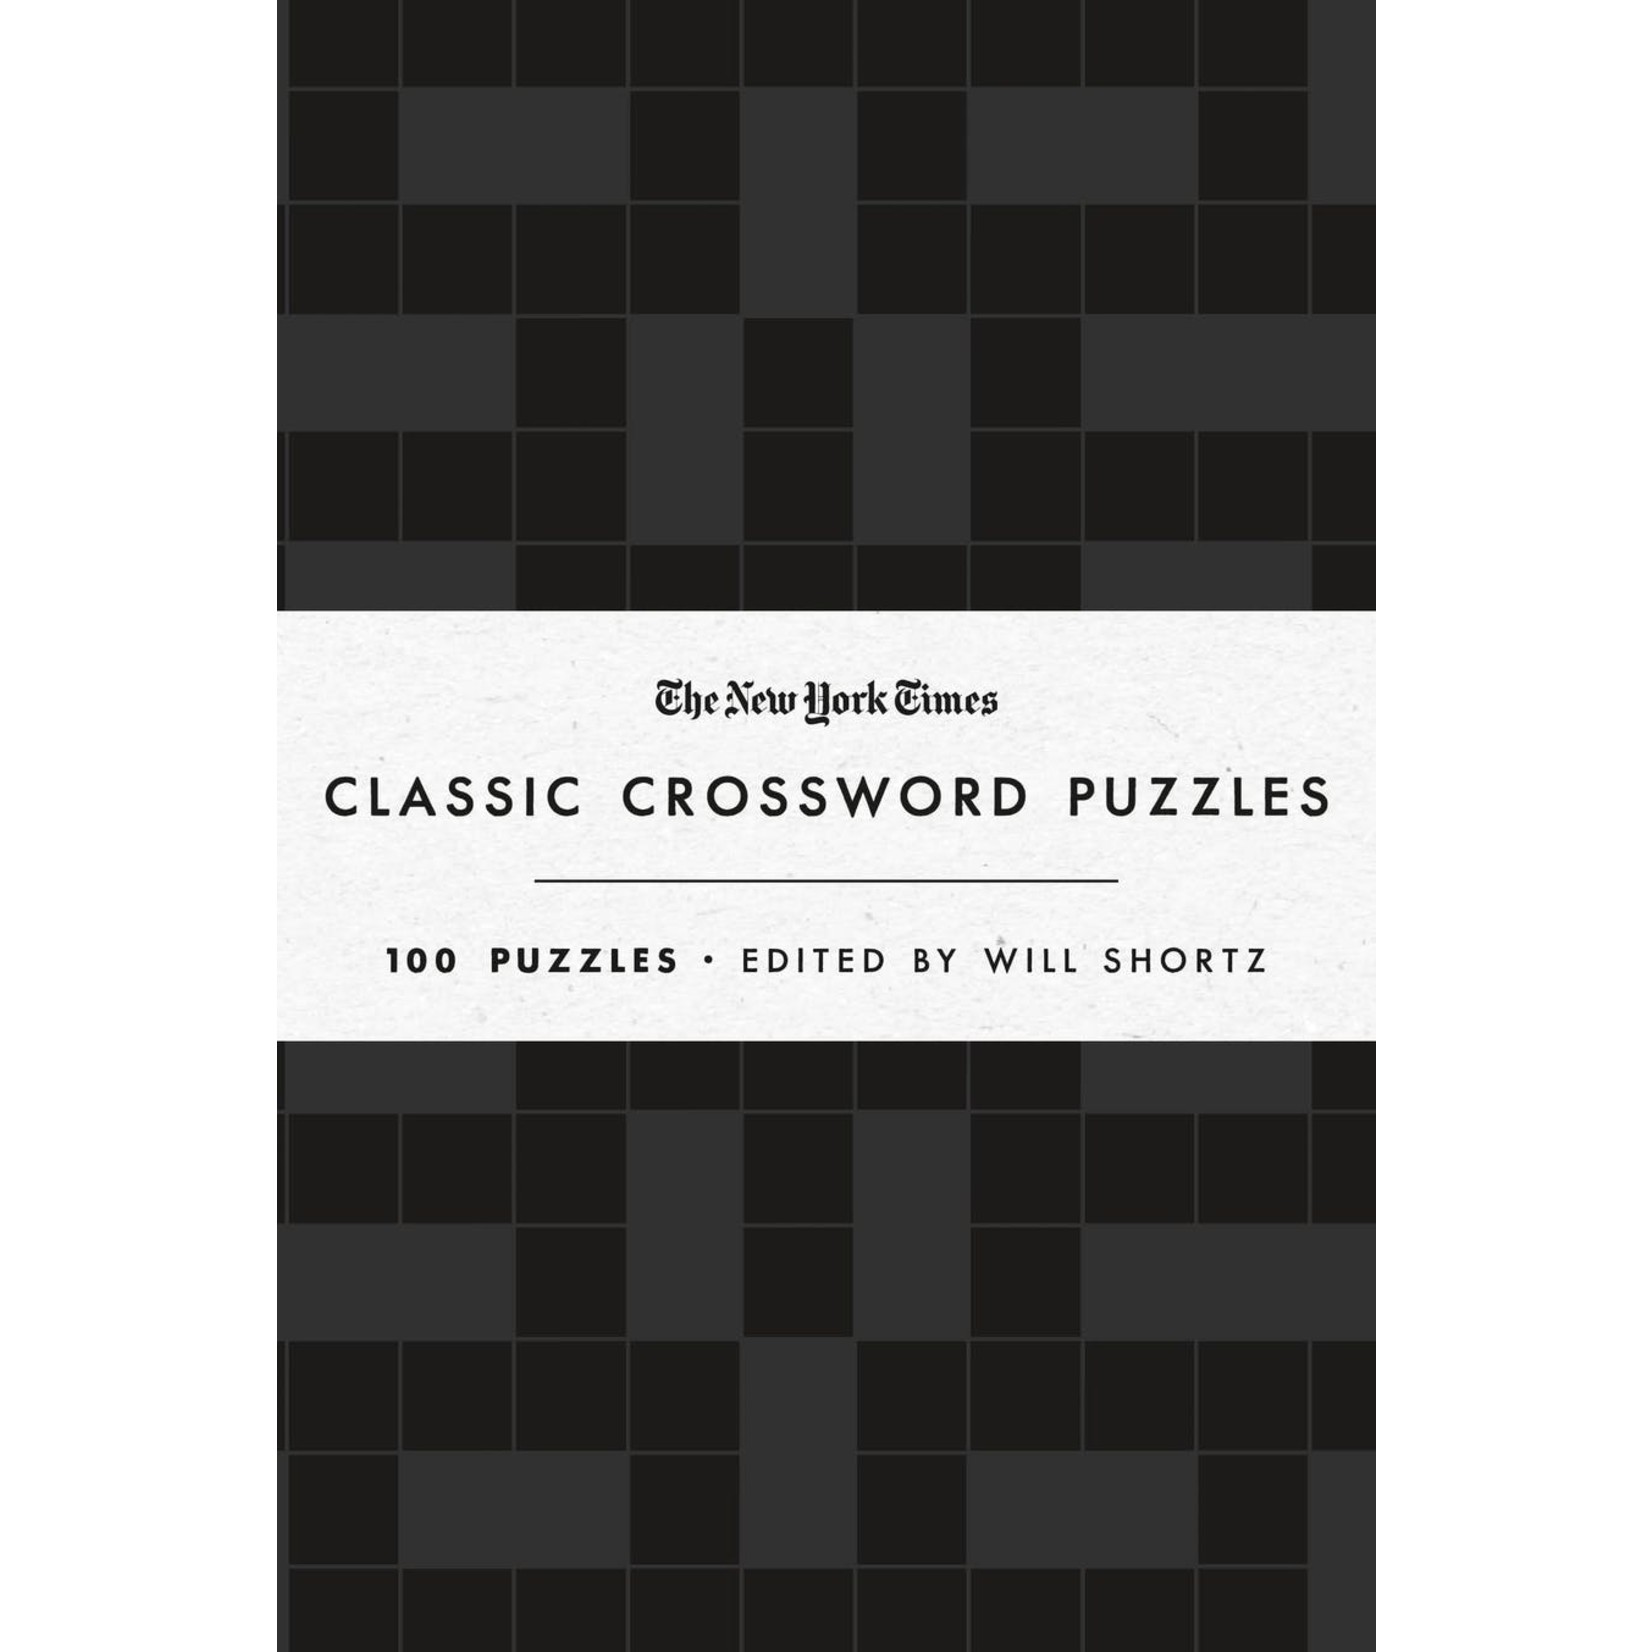 The New York Times The New York Times: Classic Crossword Puzzles (Black and White)